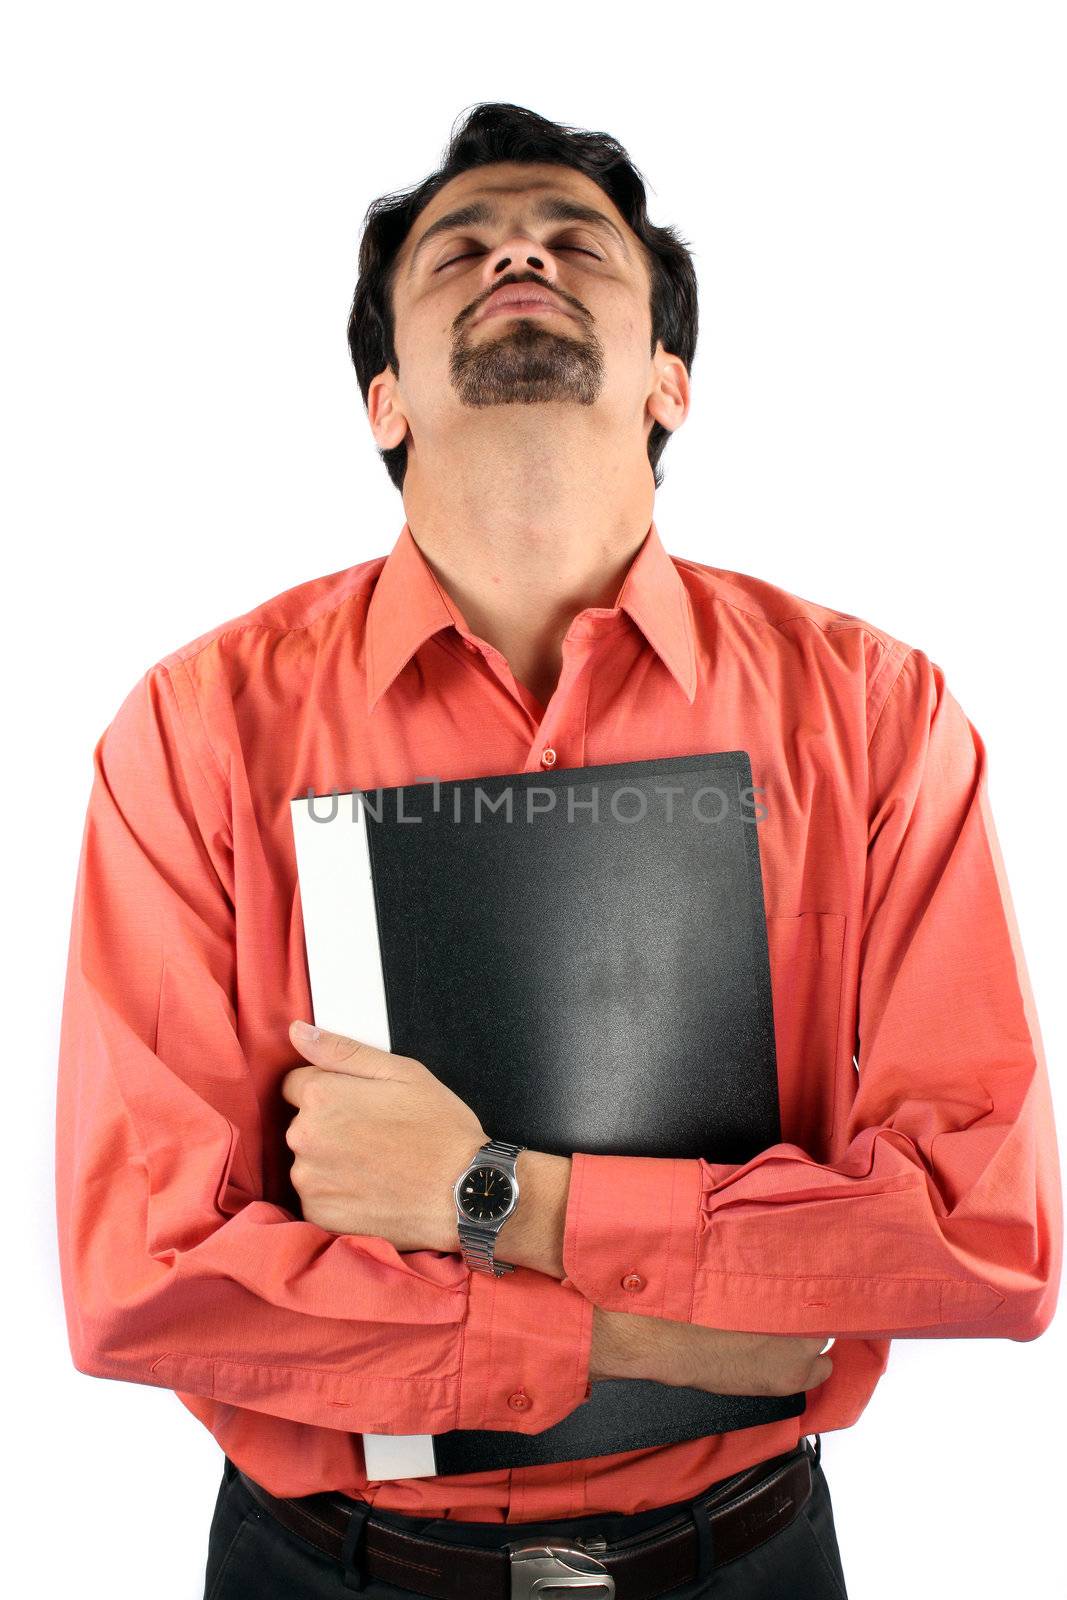 A metaphorical portrait of a young Indian guy praying before his job interview, on white studio background.